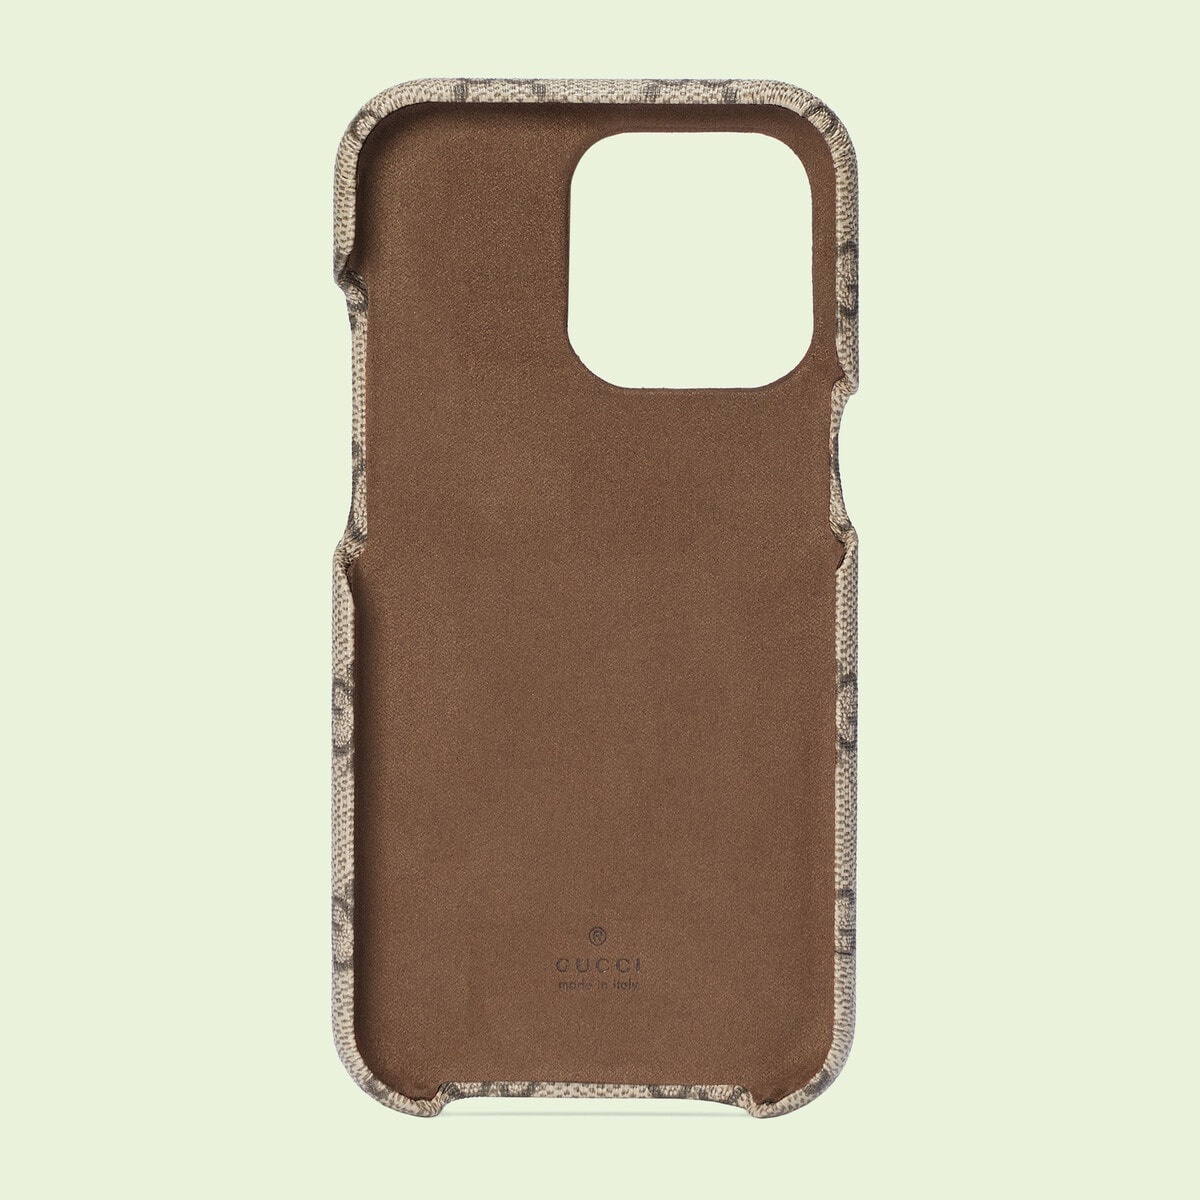 Ophidia case for iPhone 13 Pro - 2